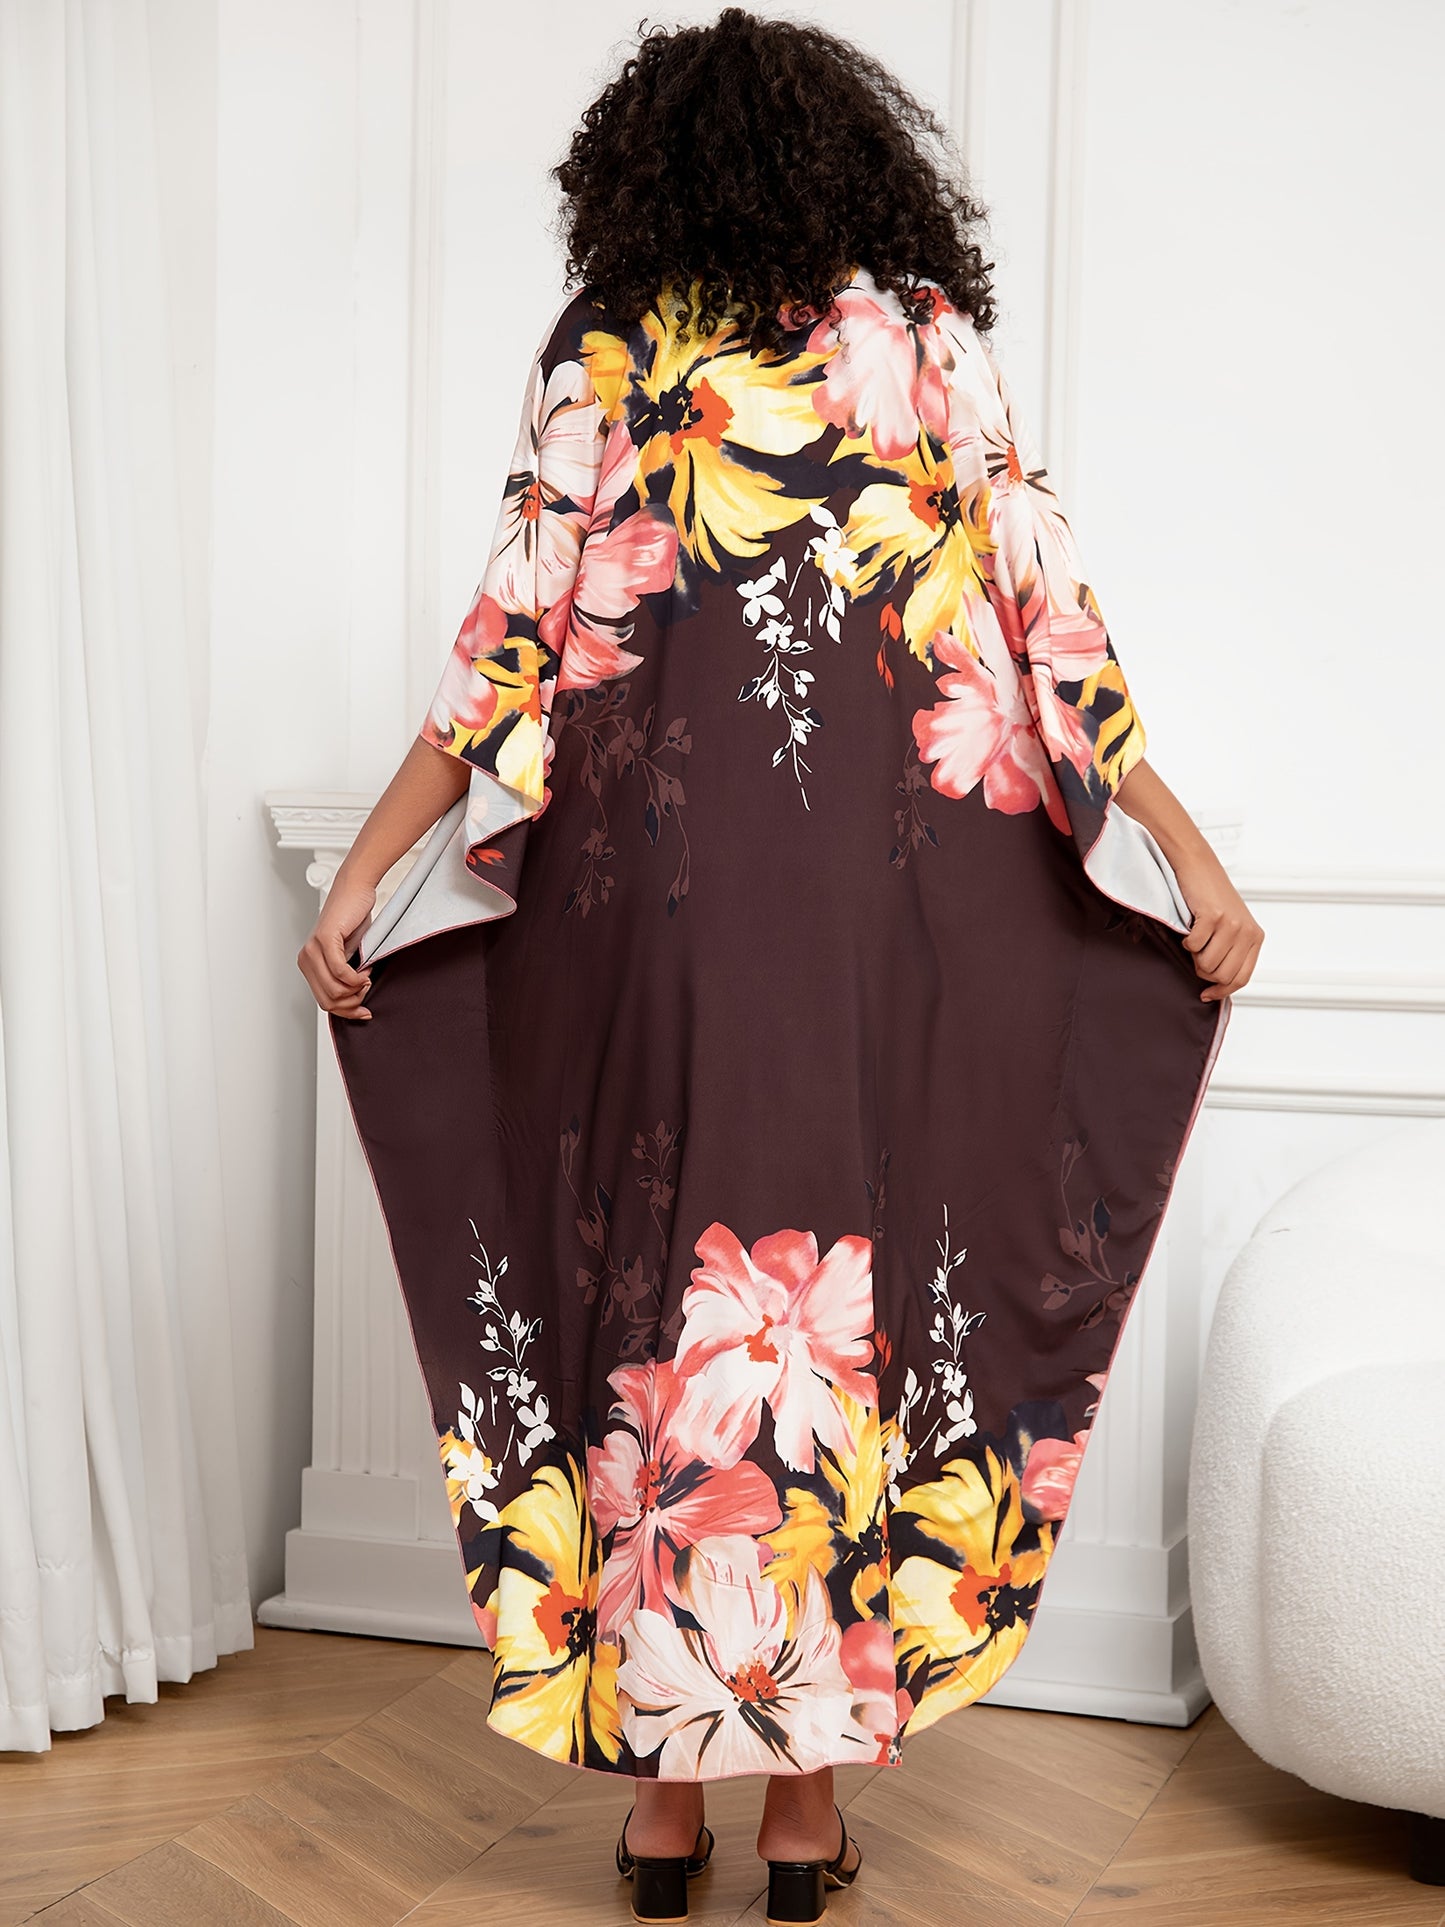 Plus Size Floral Print Dress, Casual V Neck Batwing Sleeve Dress, Women's Plus Size Clothing For Ramadan